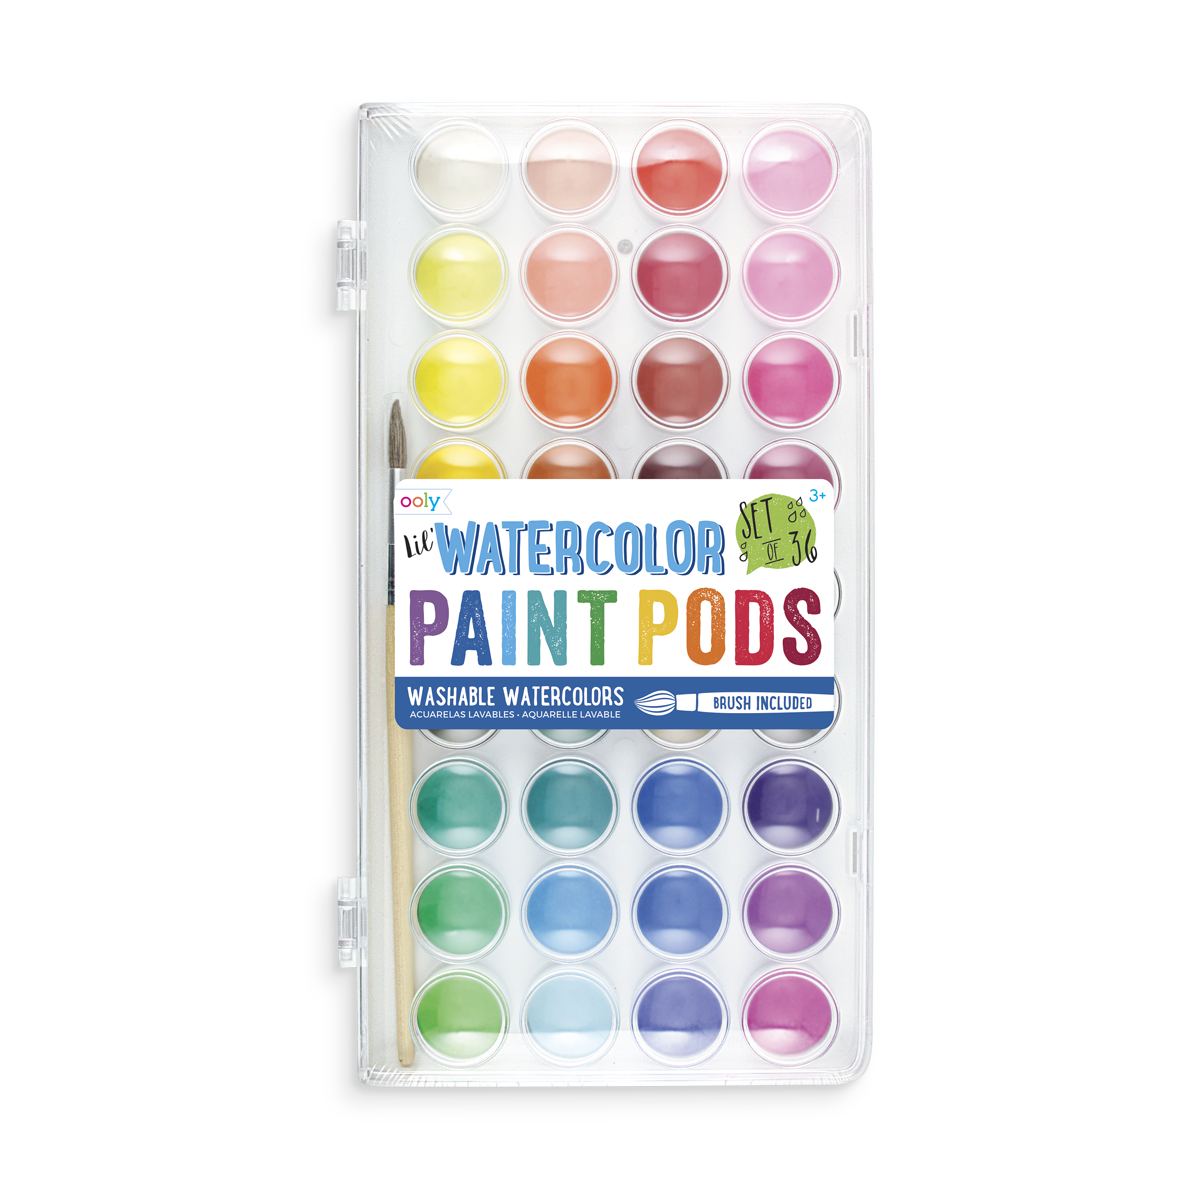 lil Watercolor Paint Pod set with watercolor paint and paintbrush